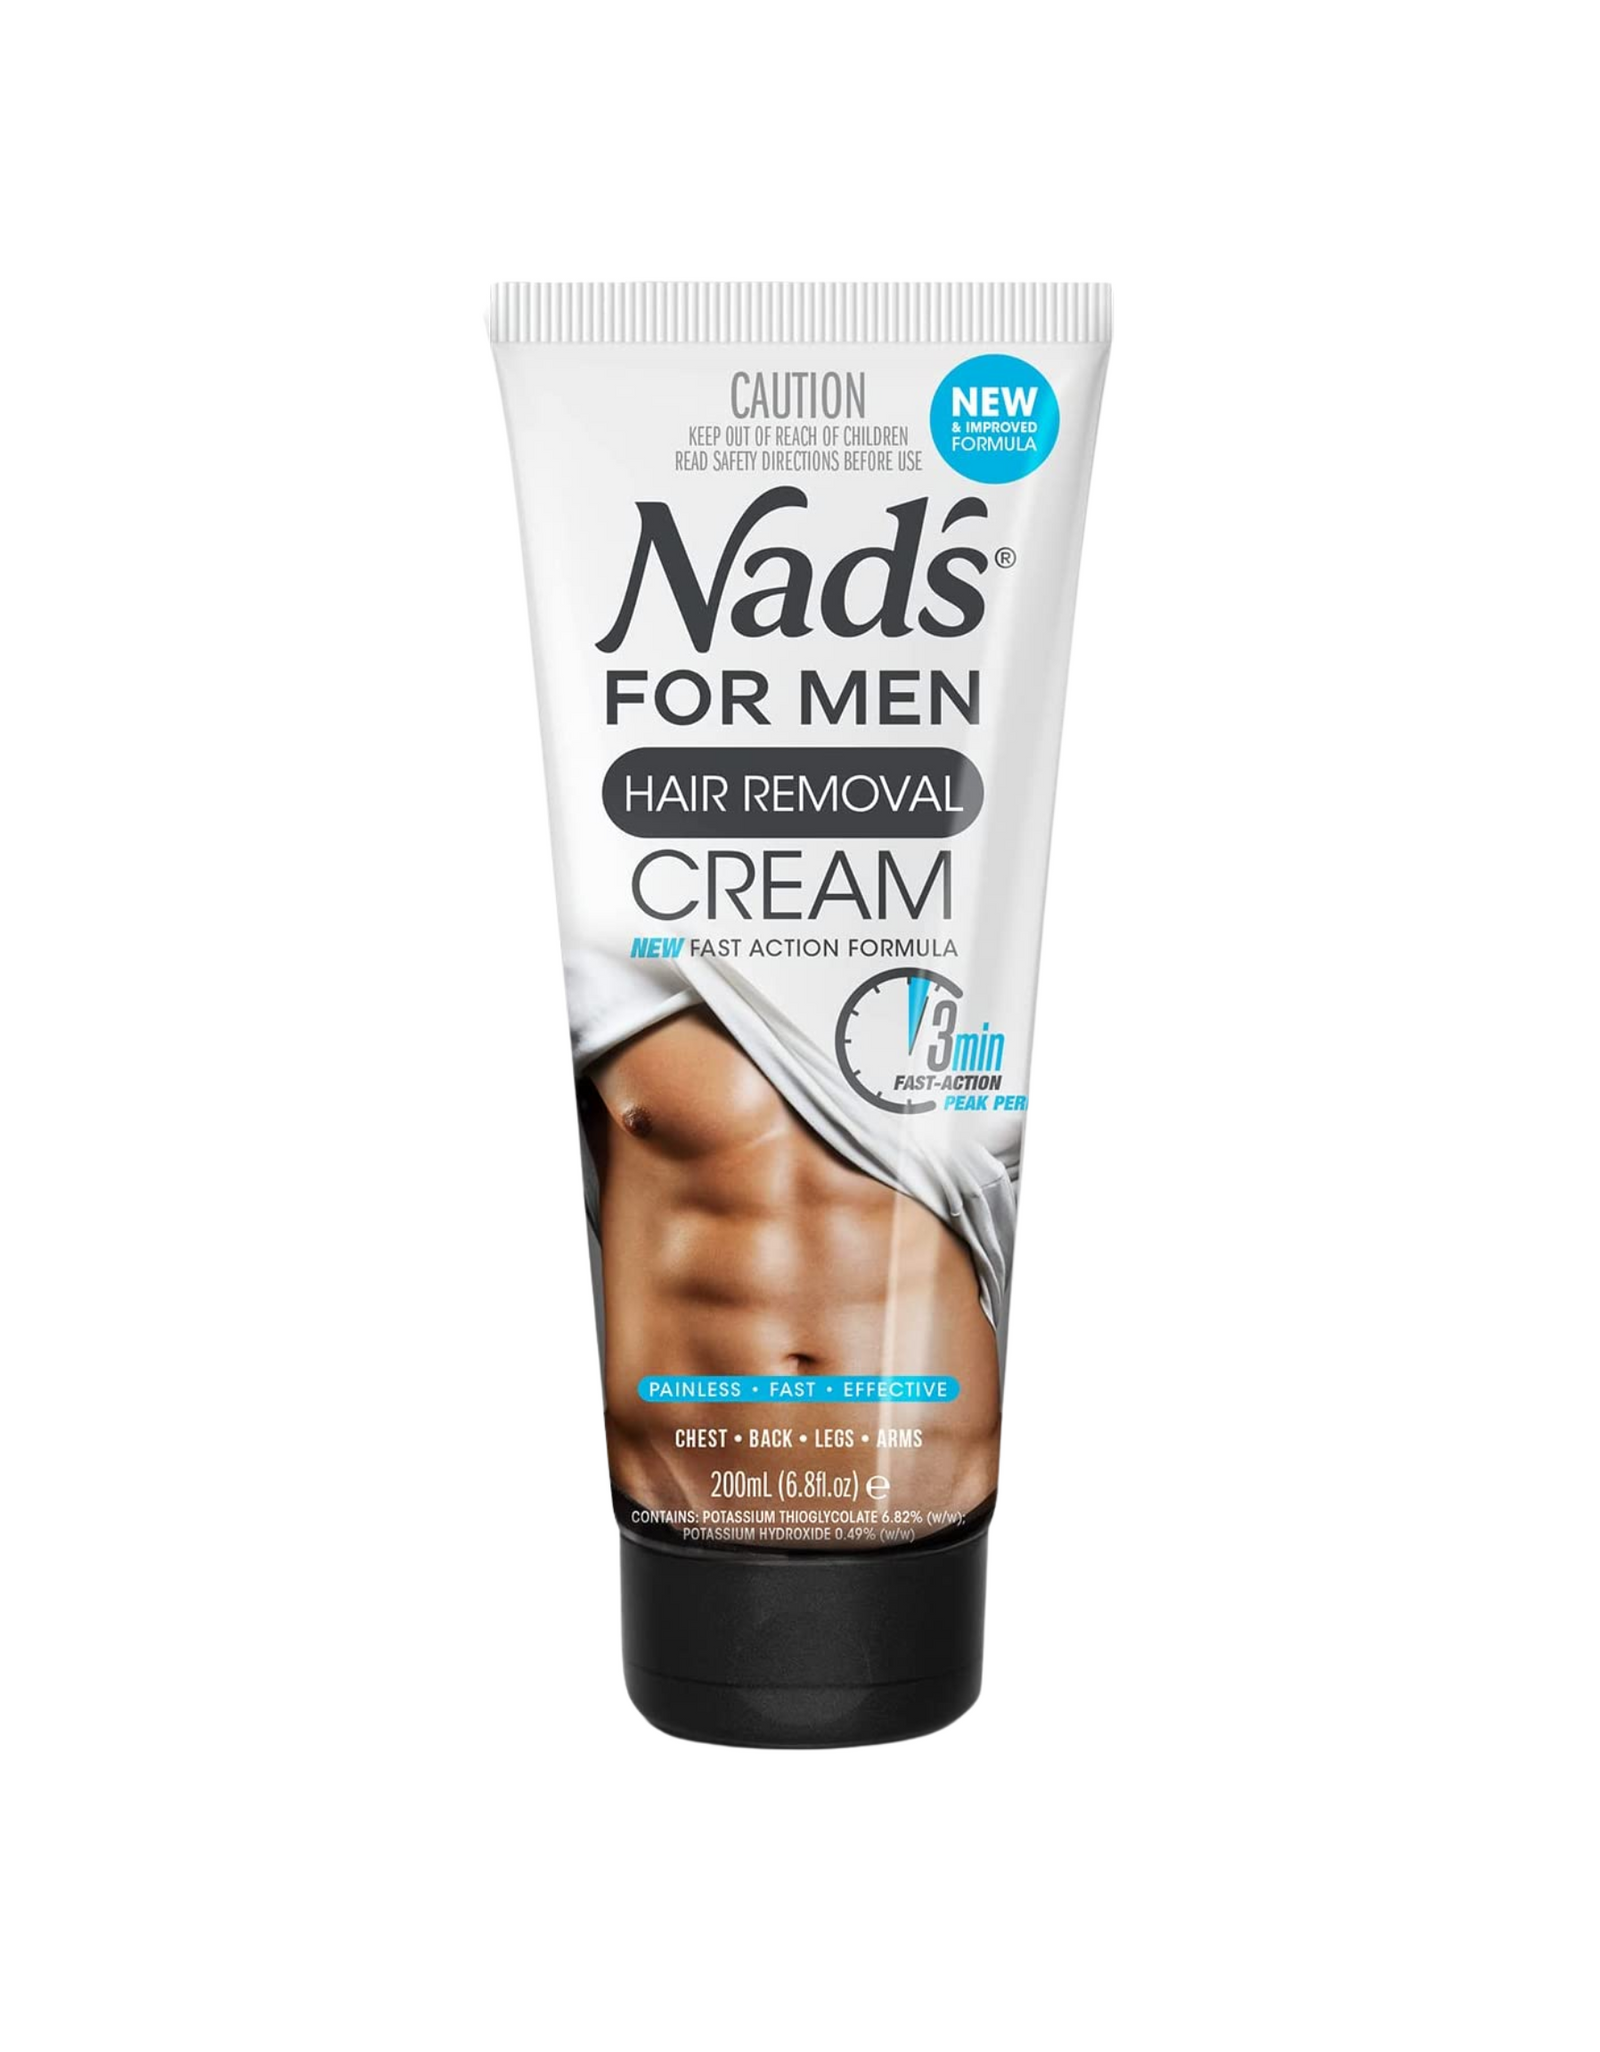 Nad's for Men Hair Removal Cream - Painless, Fast and Effective, 6.8 Oz